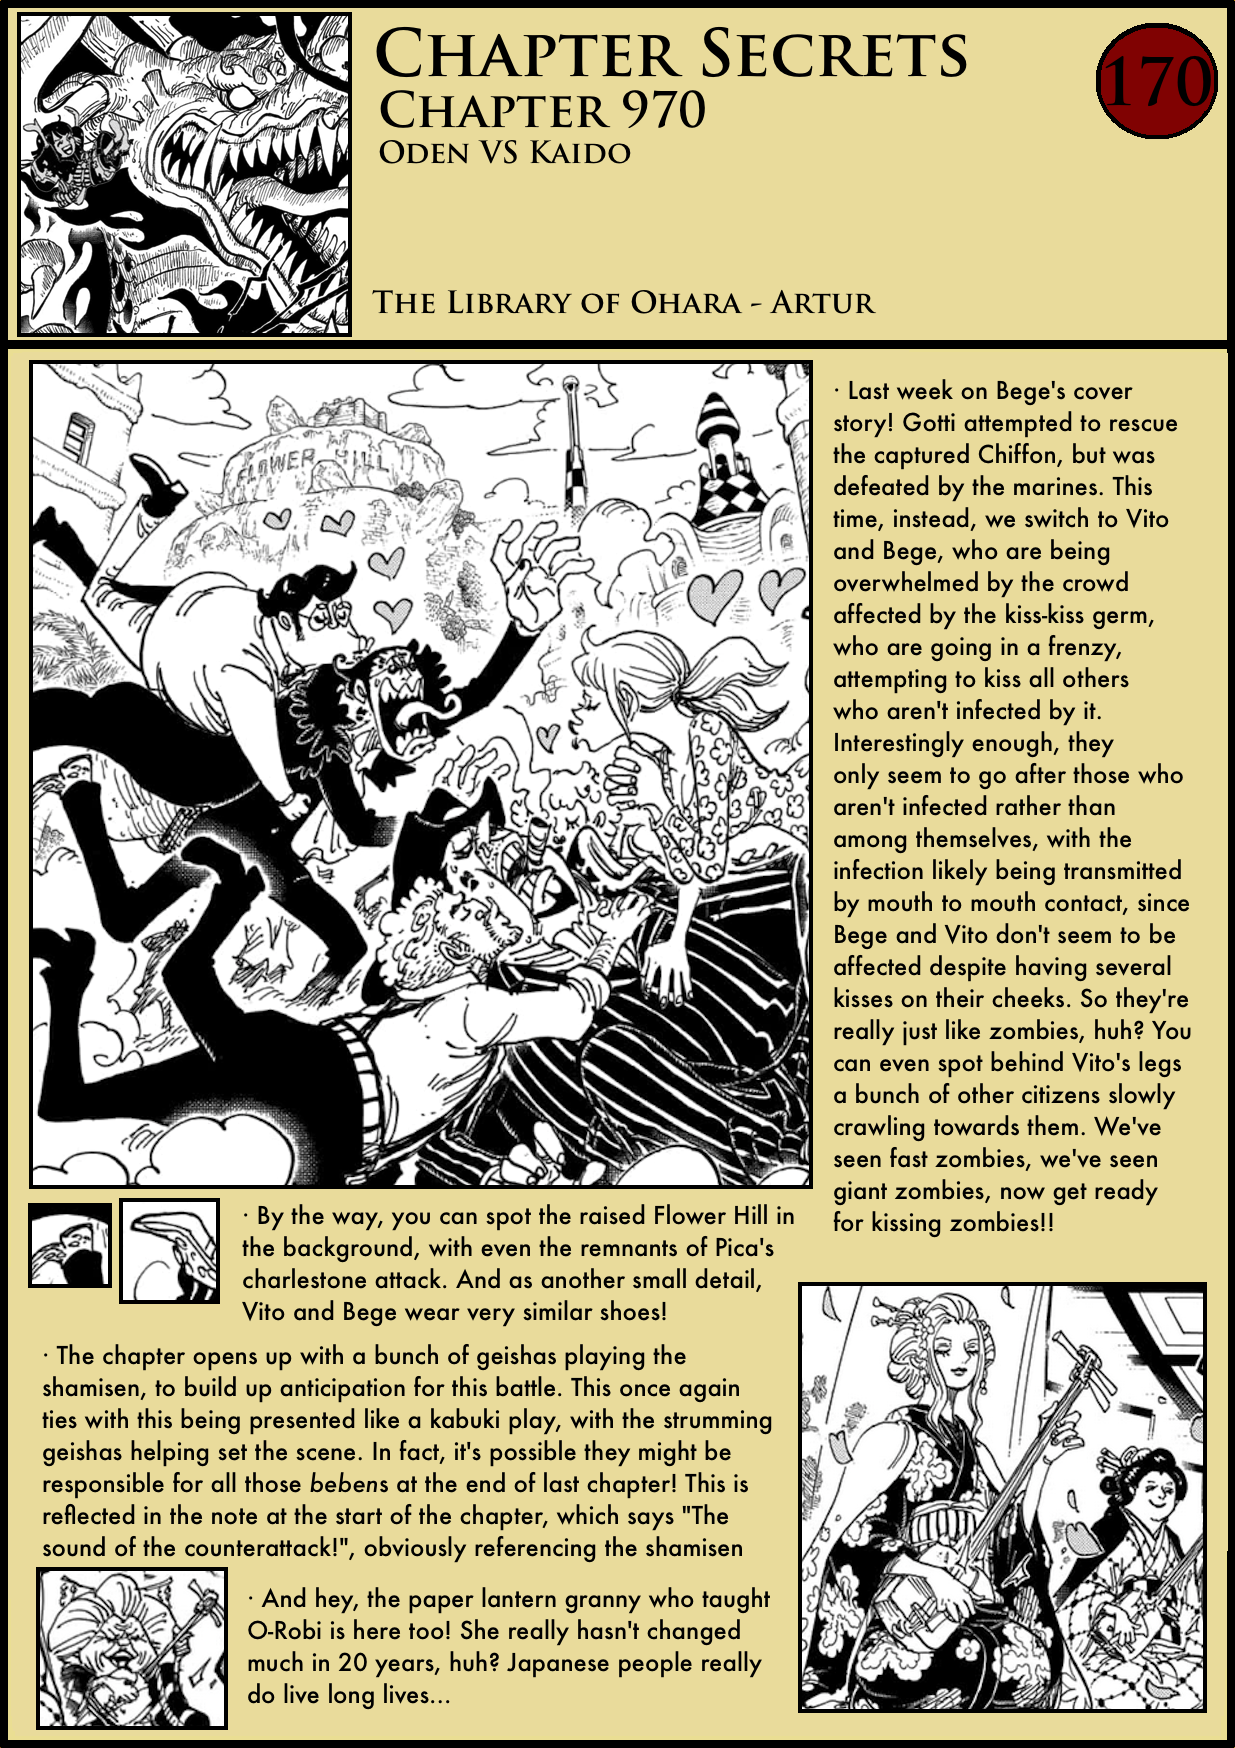 Chapter Secrets – Chapter 1060 in-depth analysis – The Library of Ohara